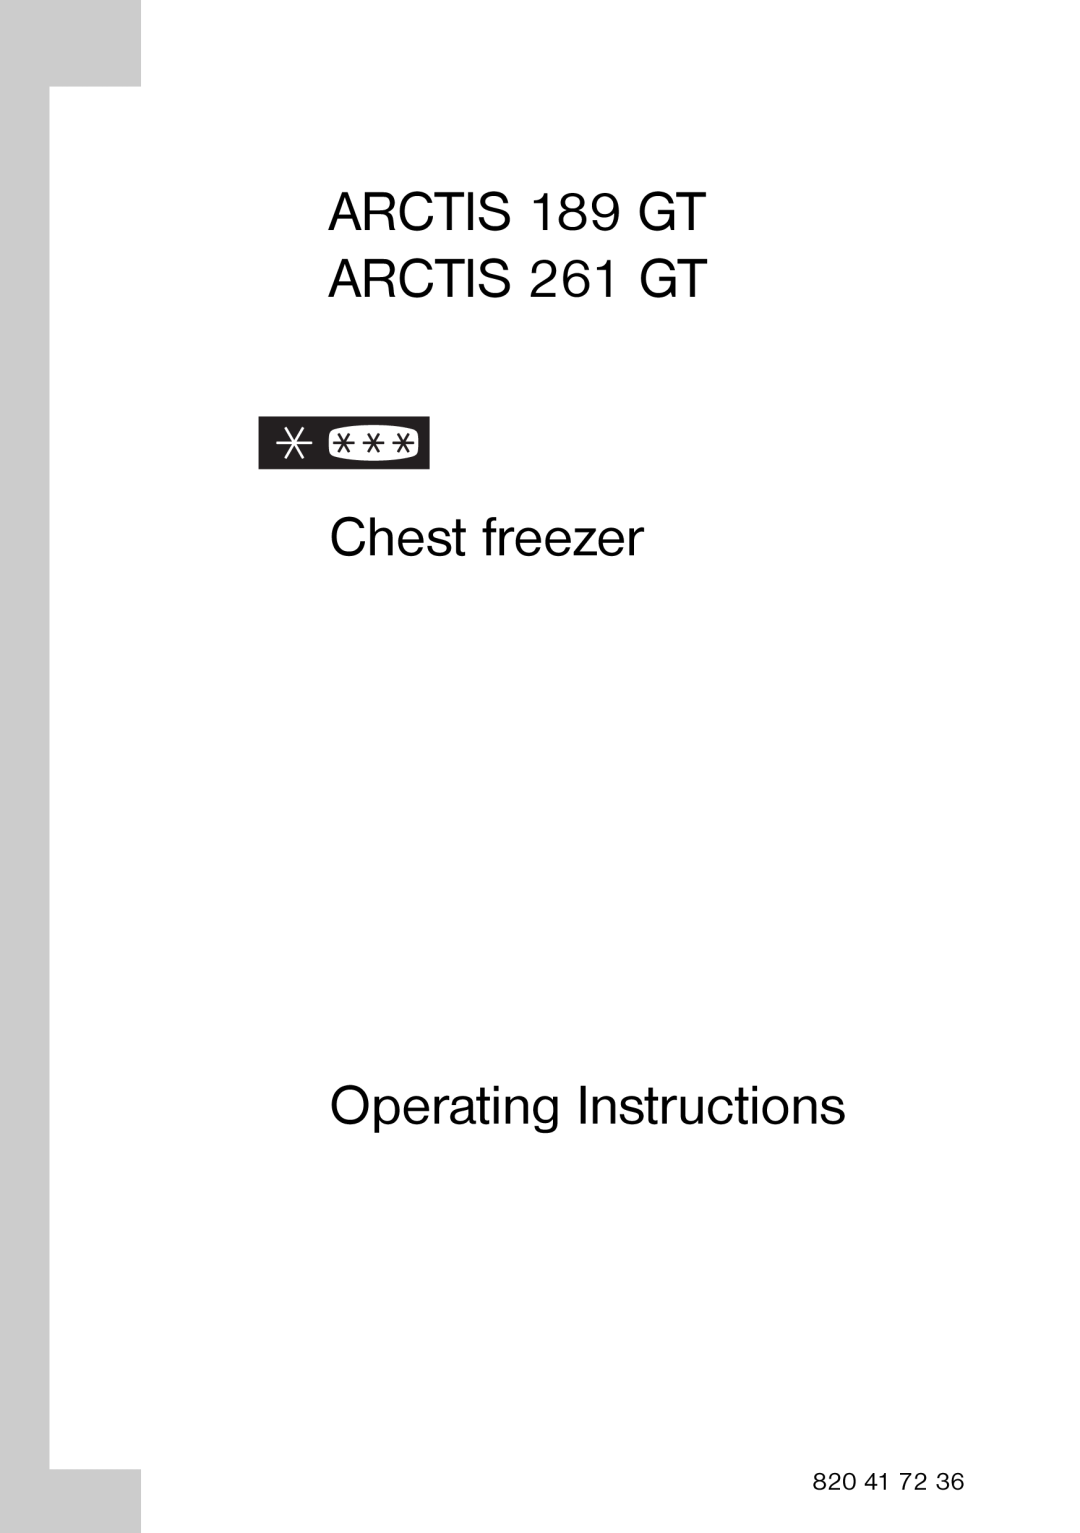 Electrolux operating instructions ARCTIS 189 GT ARCTIS 261 GT Chest freezer Operating Instructions 